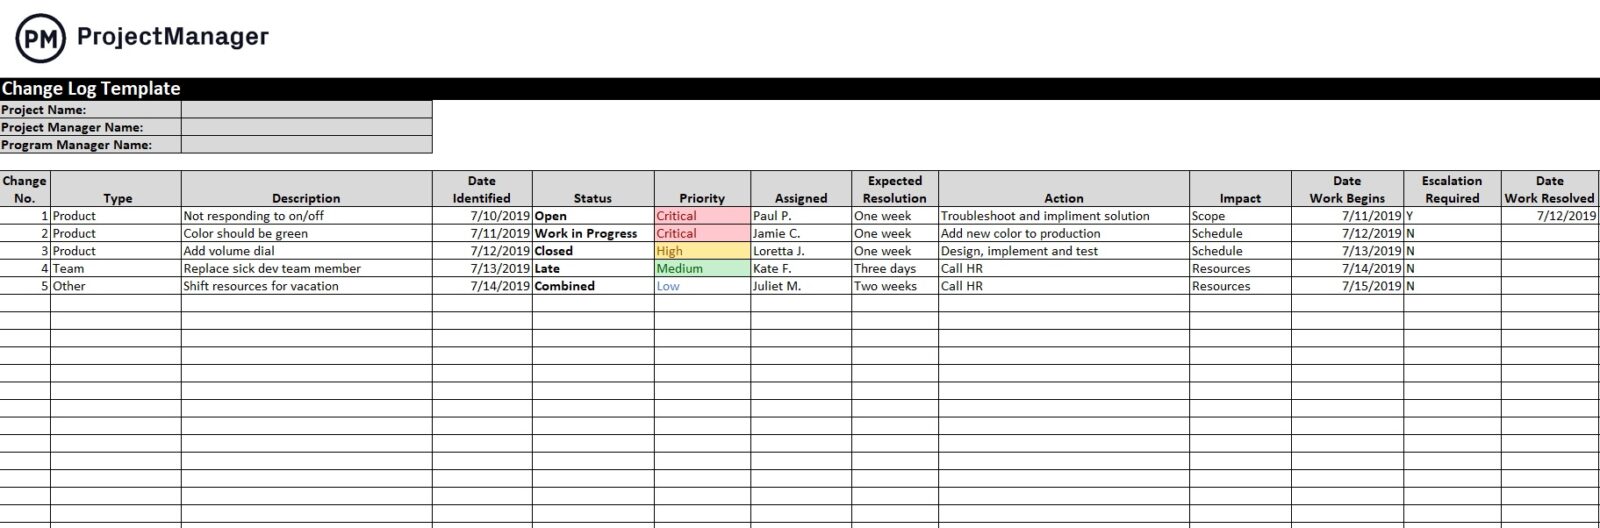 9 Essential Excel Spreadsheets for Tracking Work (Free Downloads)